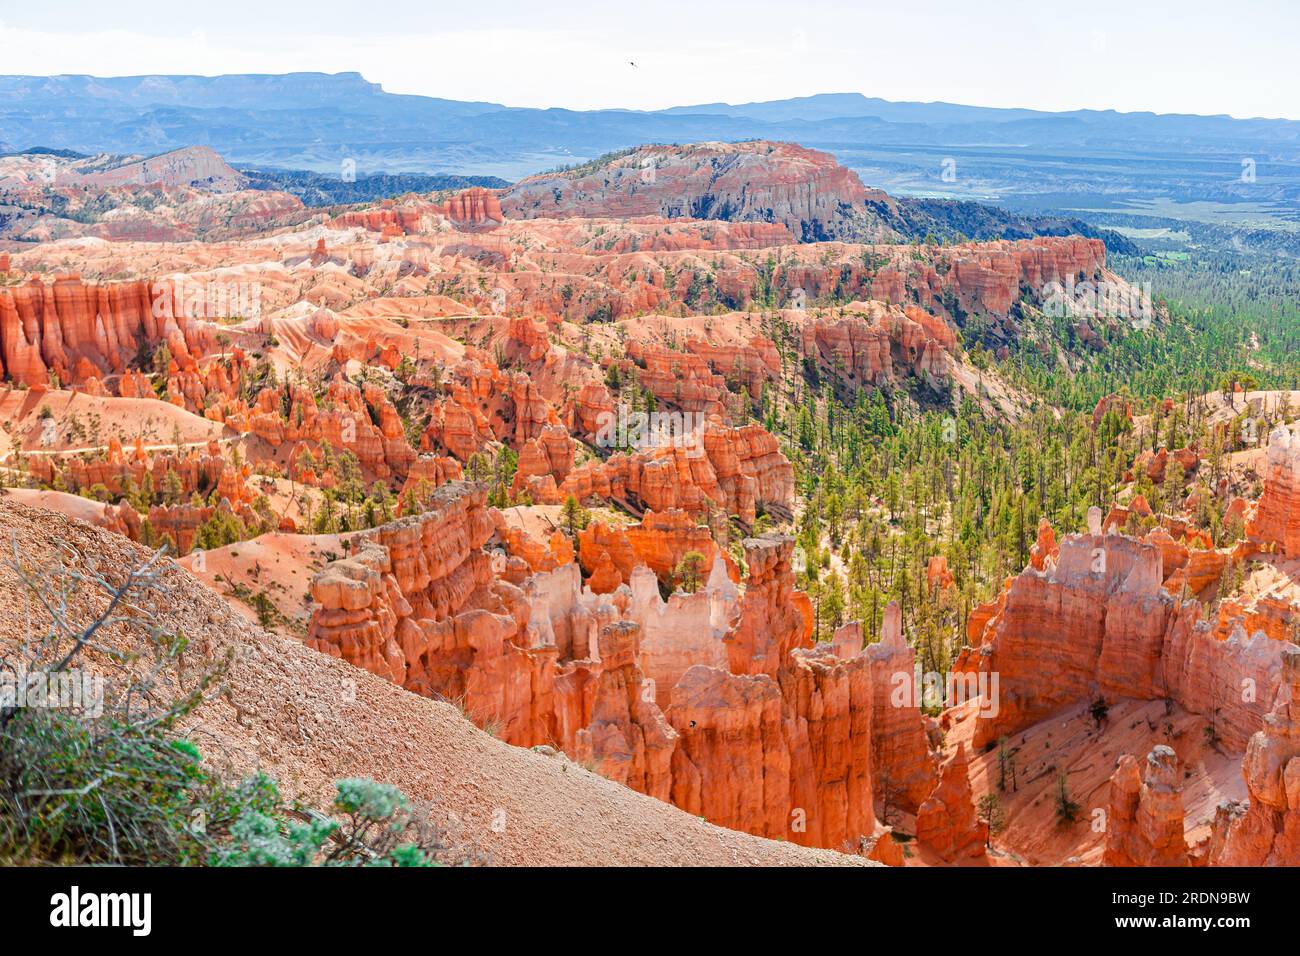 Bryce Canyon National Park landscape in Utah, United States. Stock Photo